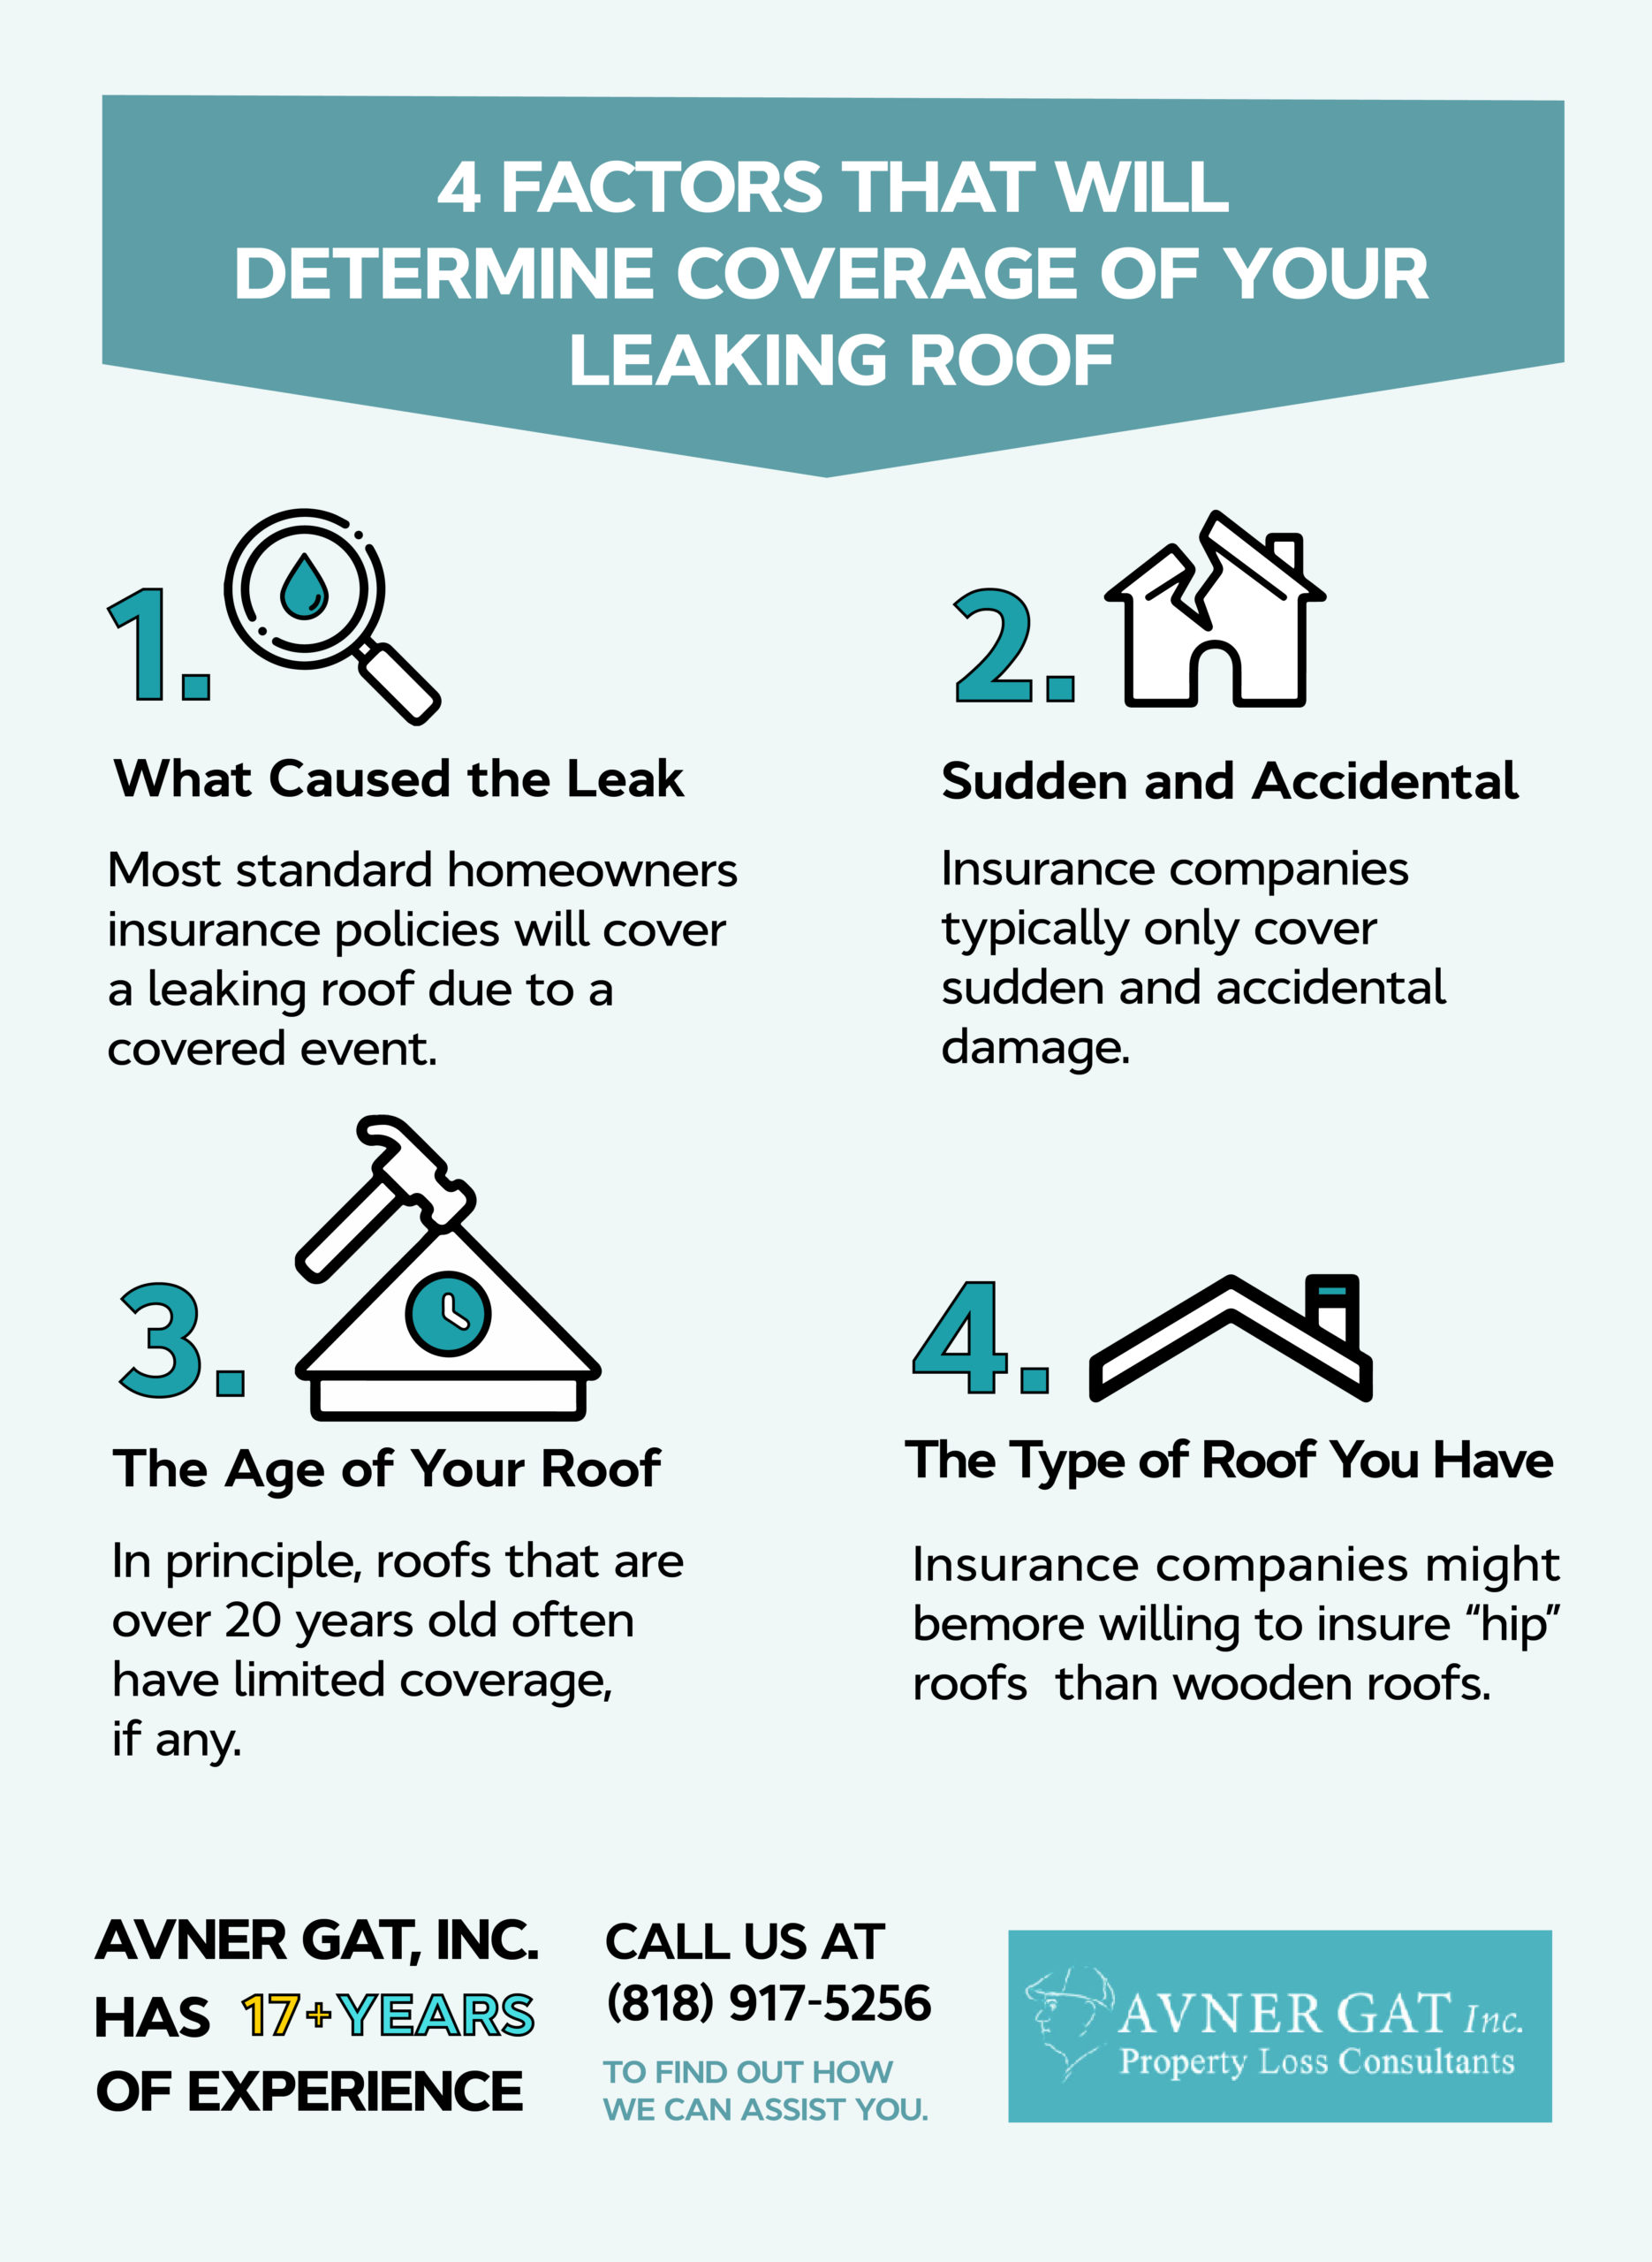 4 Factors that Will Determine Coverage of Your Leaking Roof